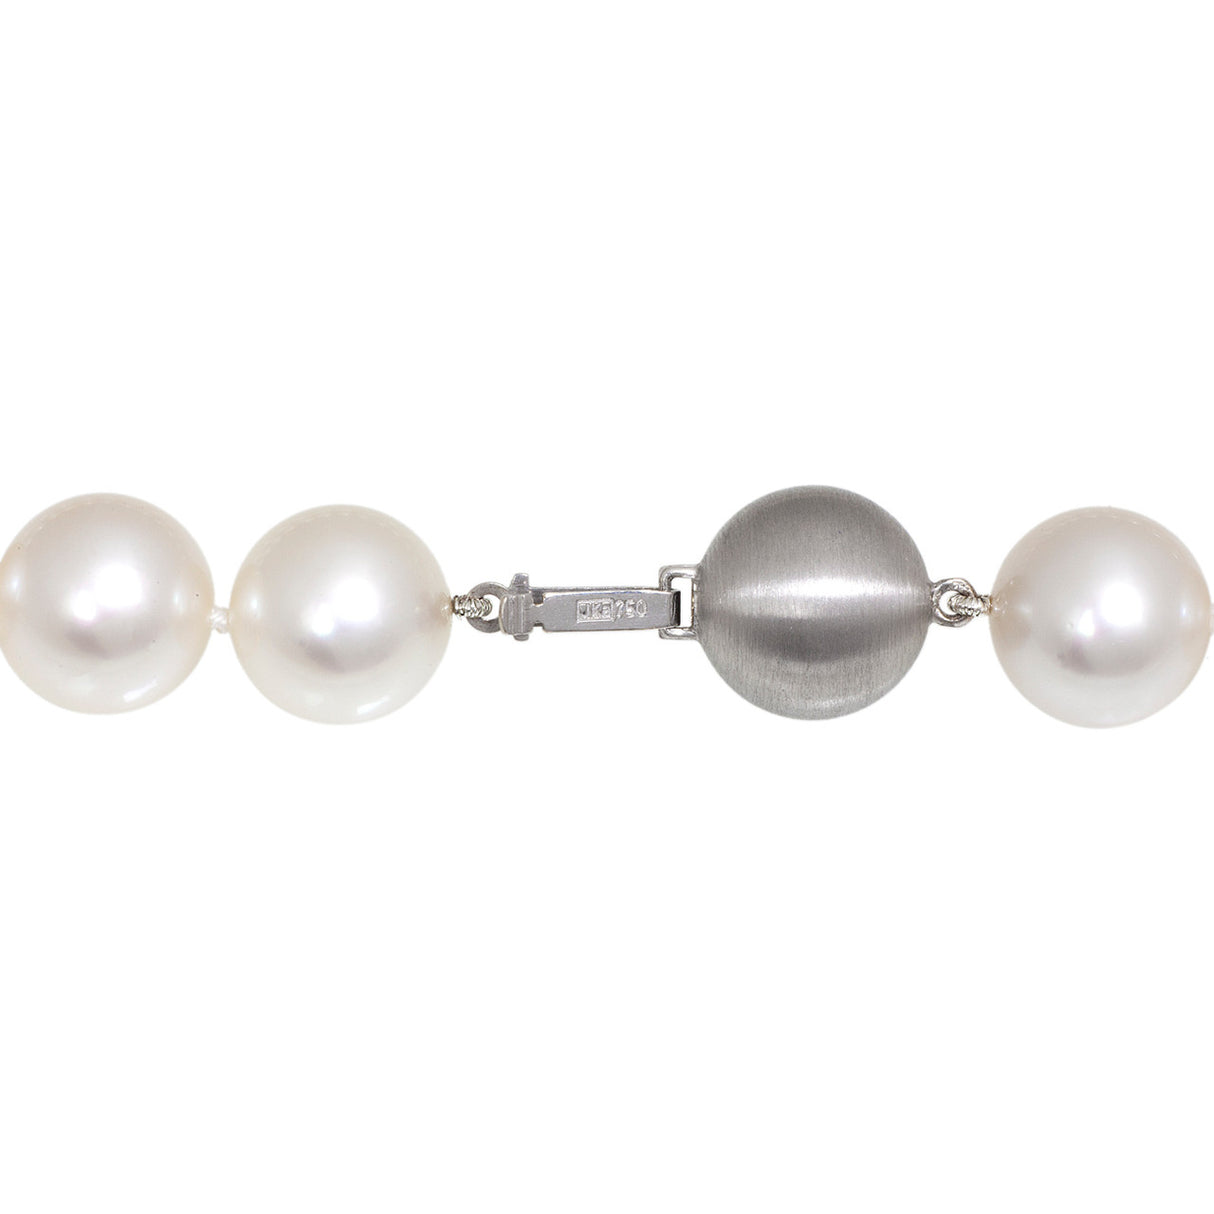 18" South Sea Pearl 18K White Gold Necklace